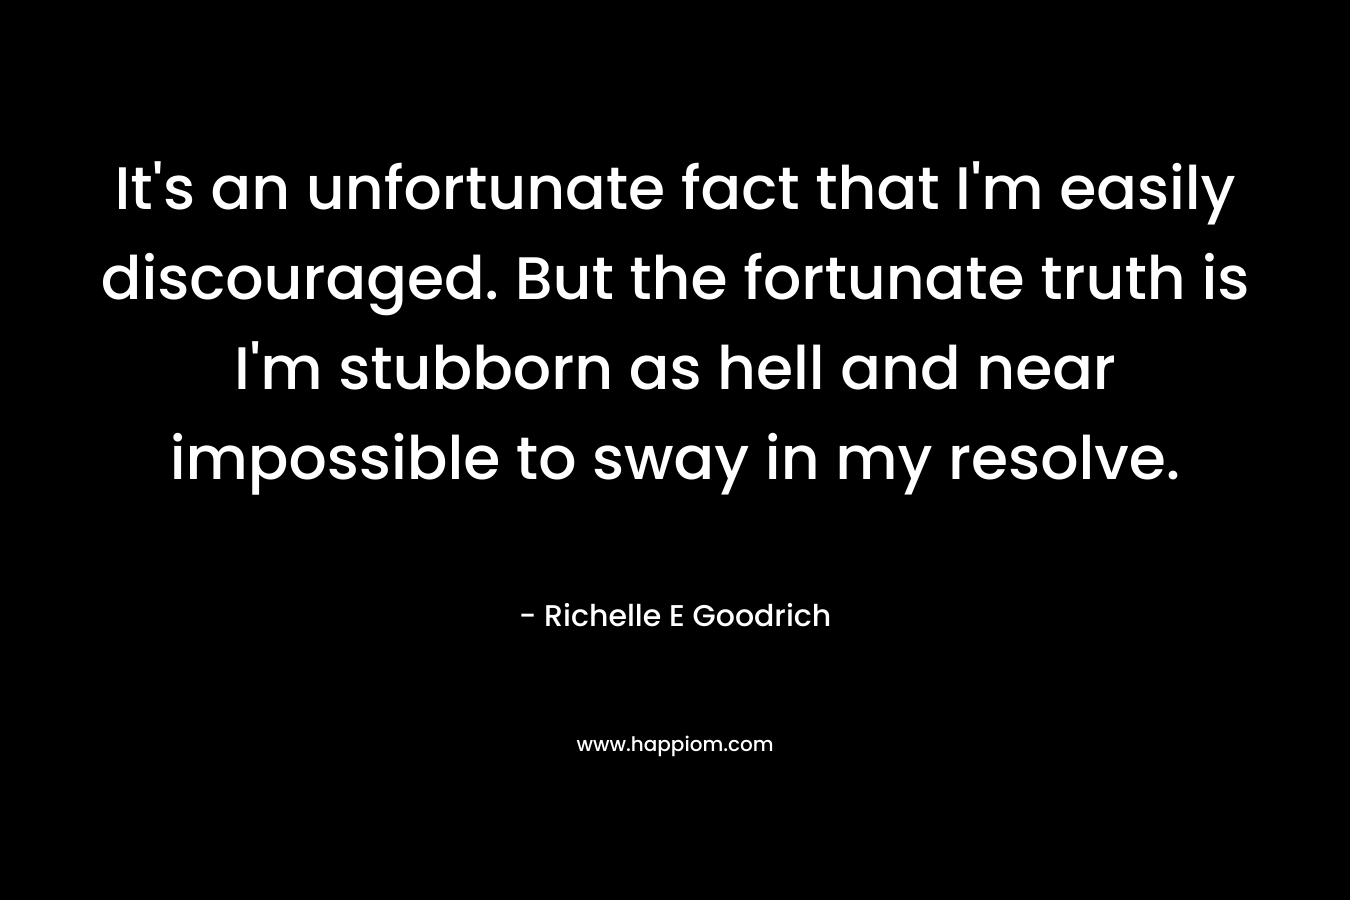 It’s an unfortunate fact that I’m easily discouraged. But the fortunate truth is I’m stubborn as hell and near impossible to sway in my resolve. – Richelle E Goodrich